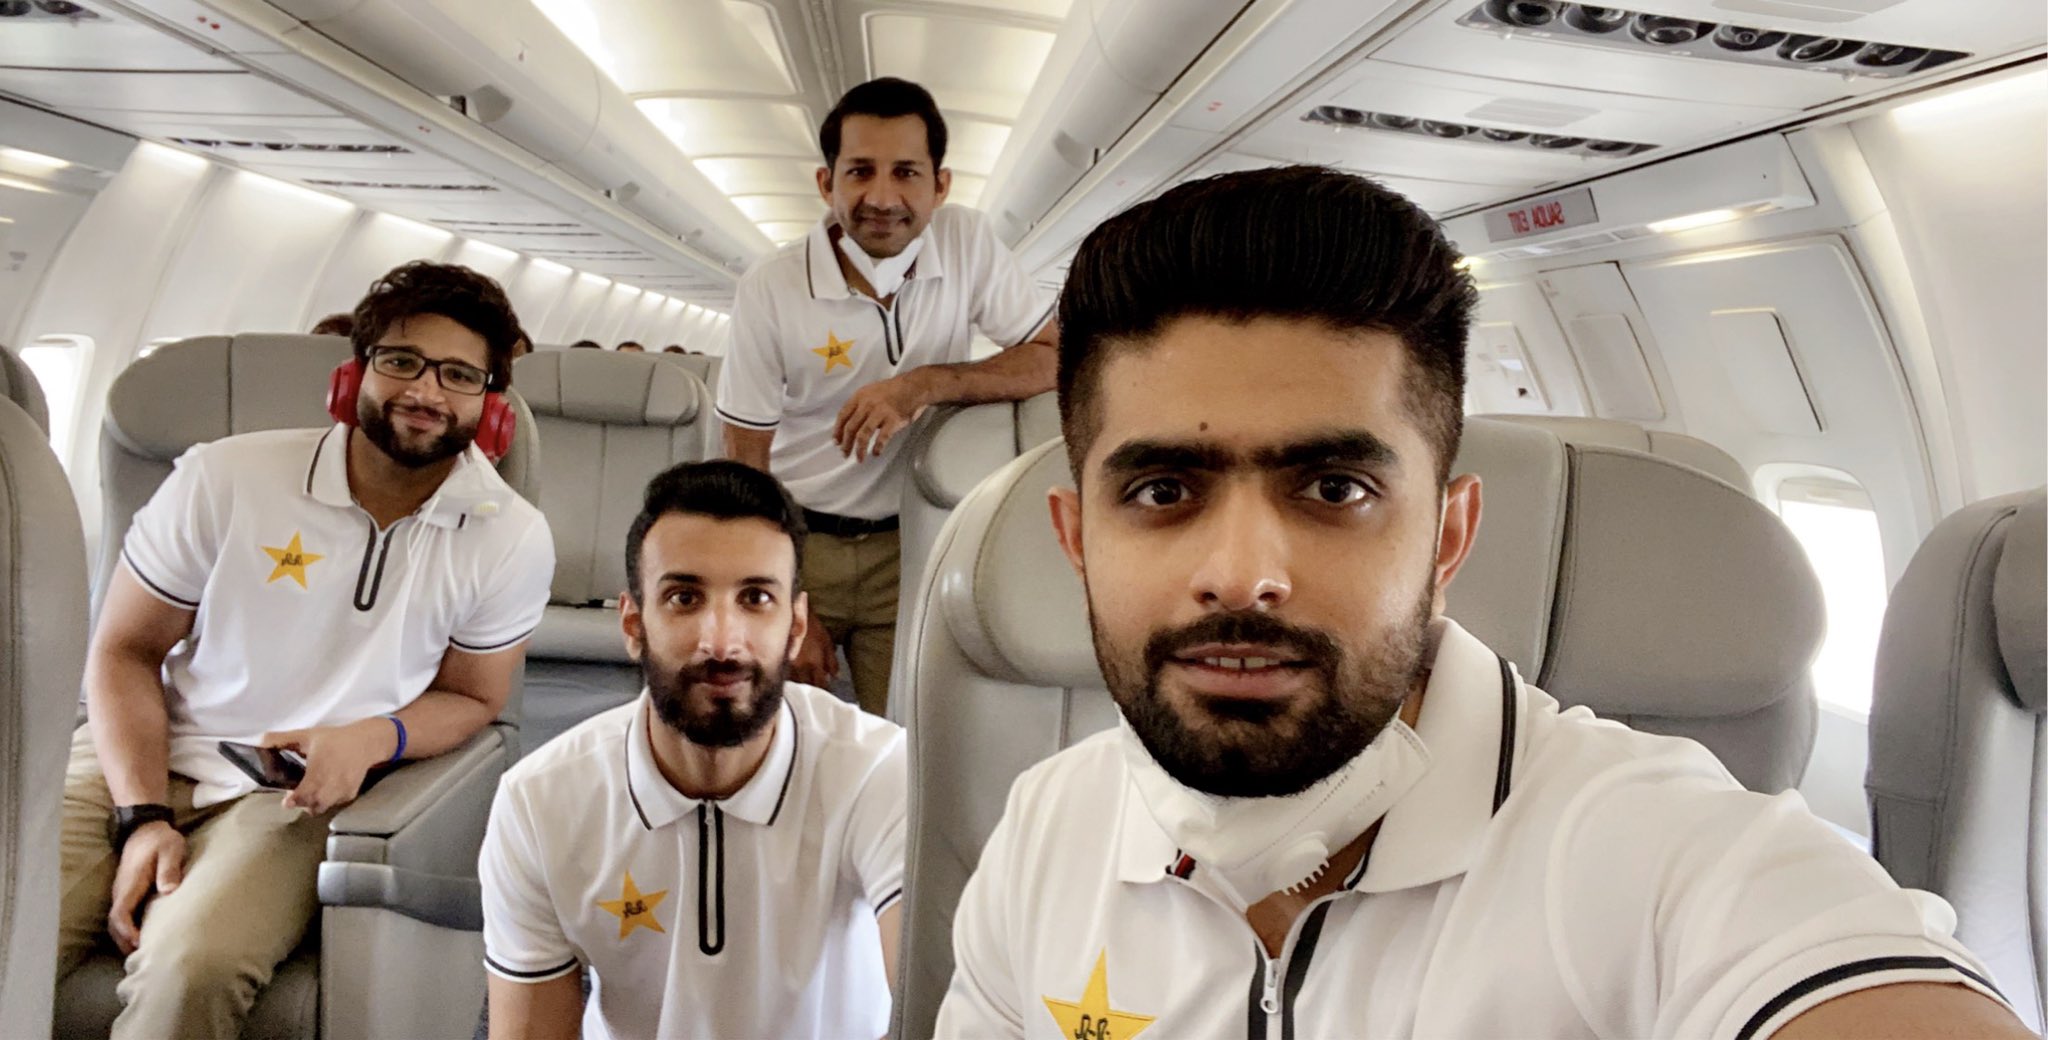 Pakistan players tested COVID-19 negative after arriving in England (Source: @babarazam258/Twitter)